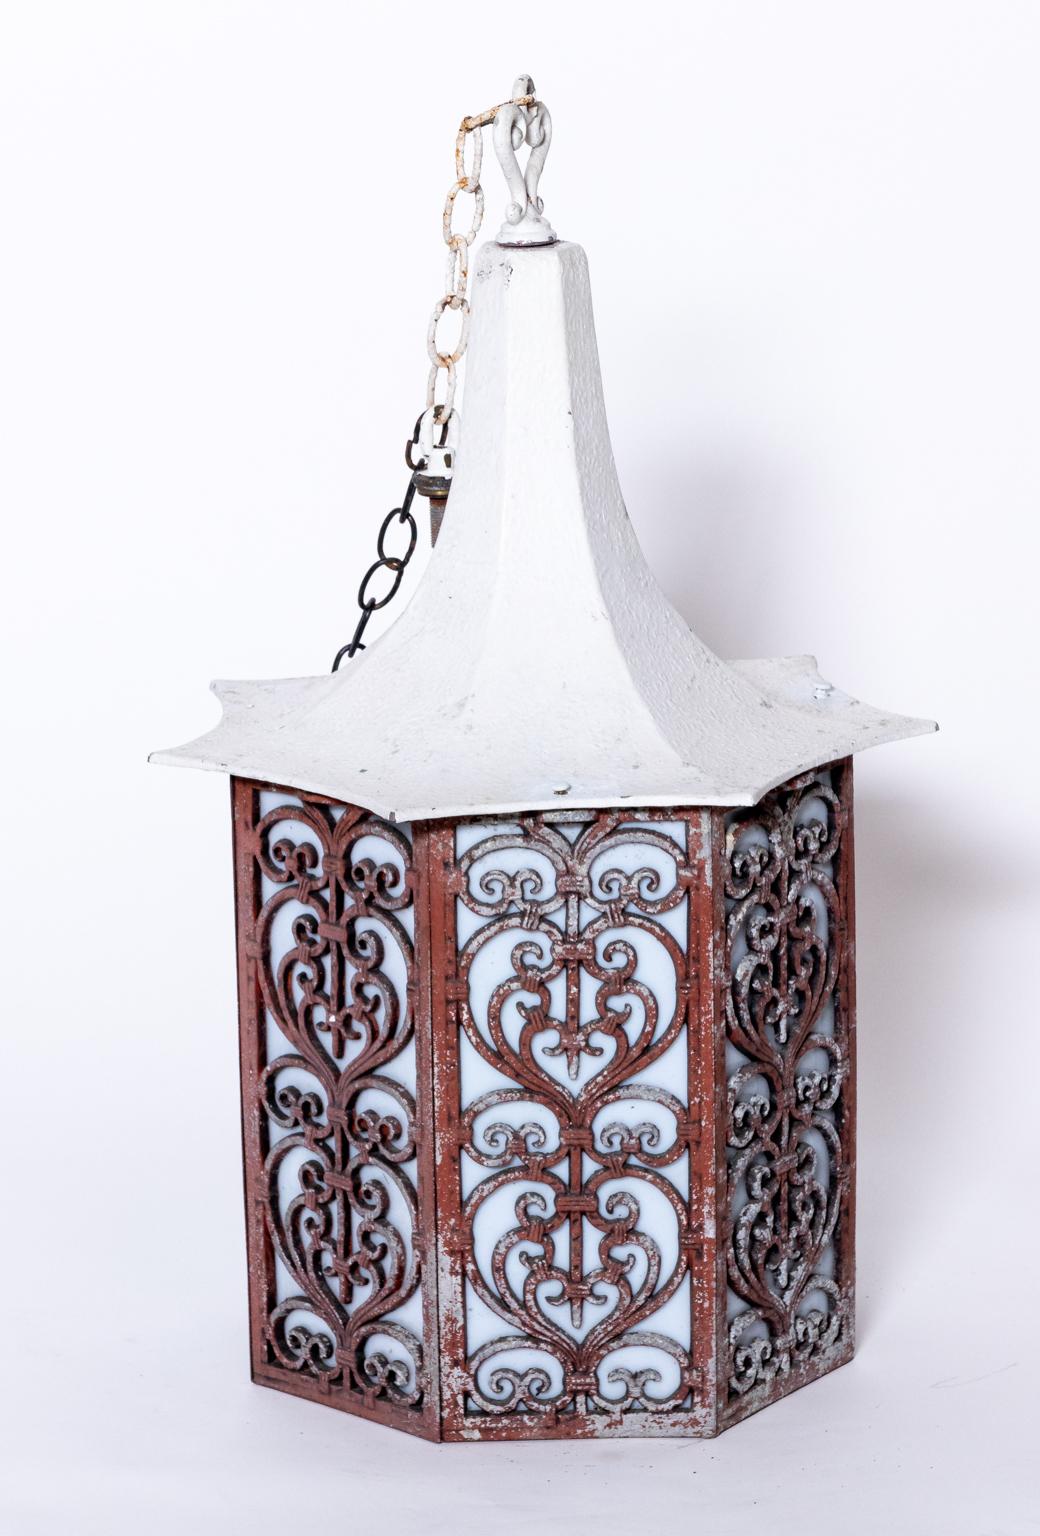 Circa mid-20th century Hollywood Regency style octagonal lantern. Each side features frosted glass panels behind an intricate c-scroll and heart shape metalwork designs. Each piece comes electrified with 12.00 Inch chain and a later ceiling cap.